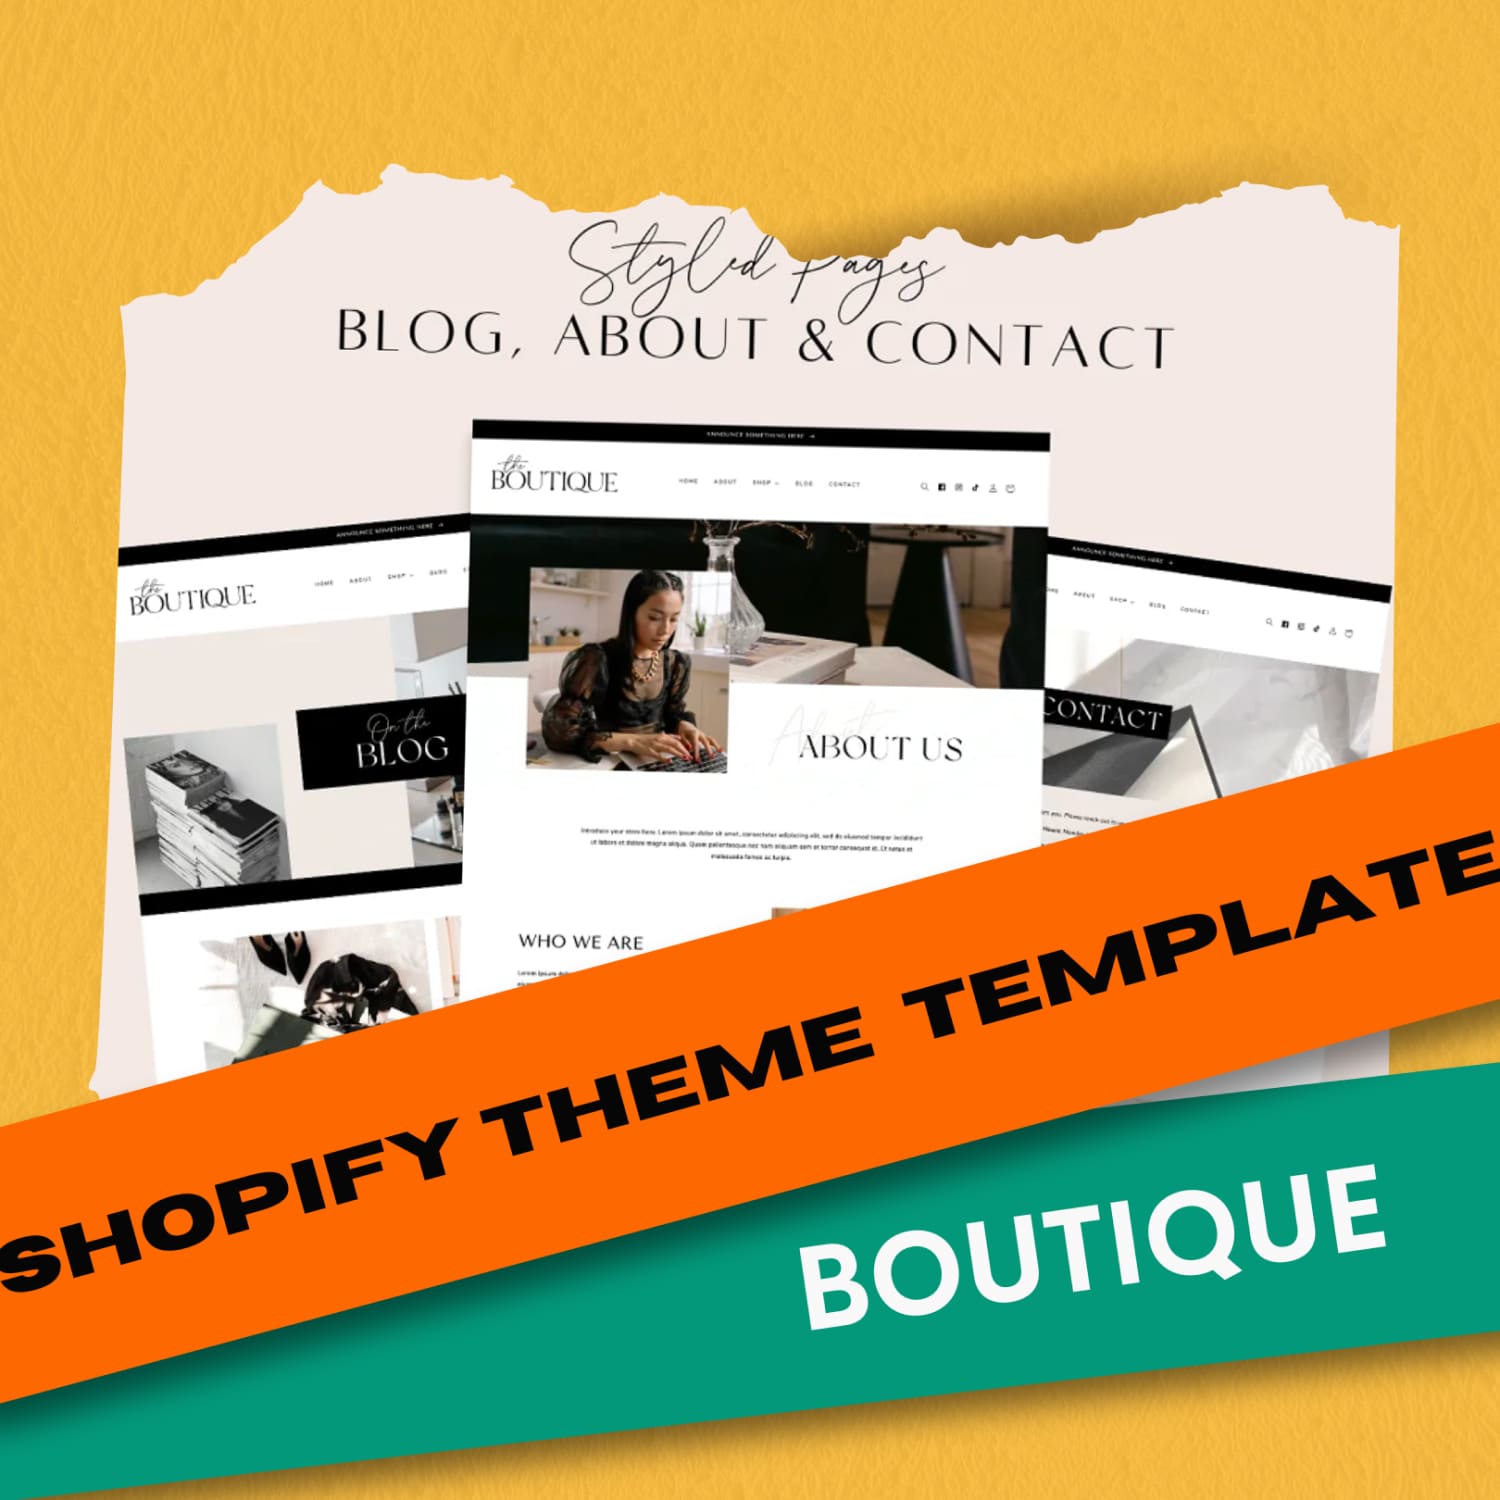 Shopify Theme Boutique Template - main image preview.